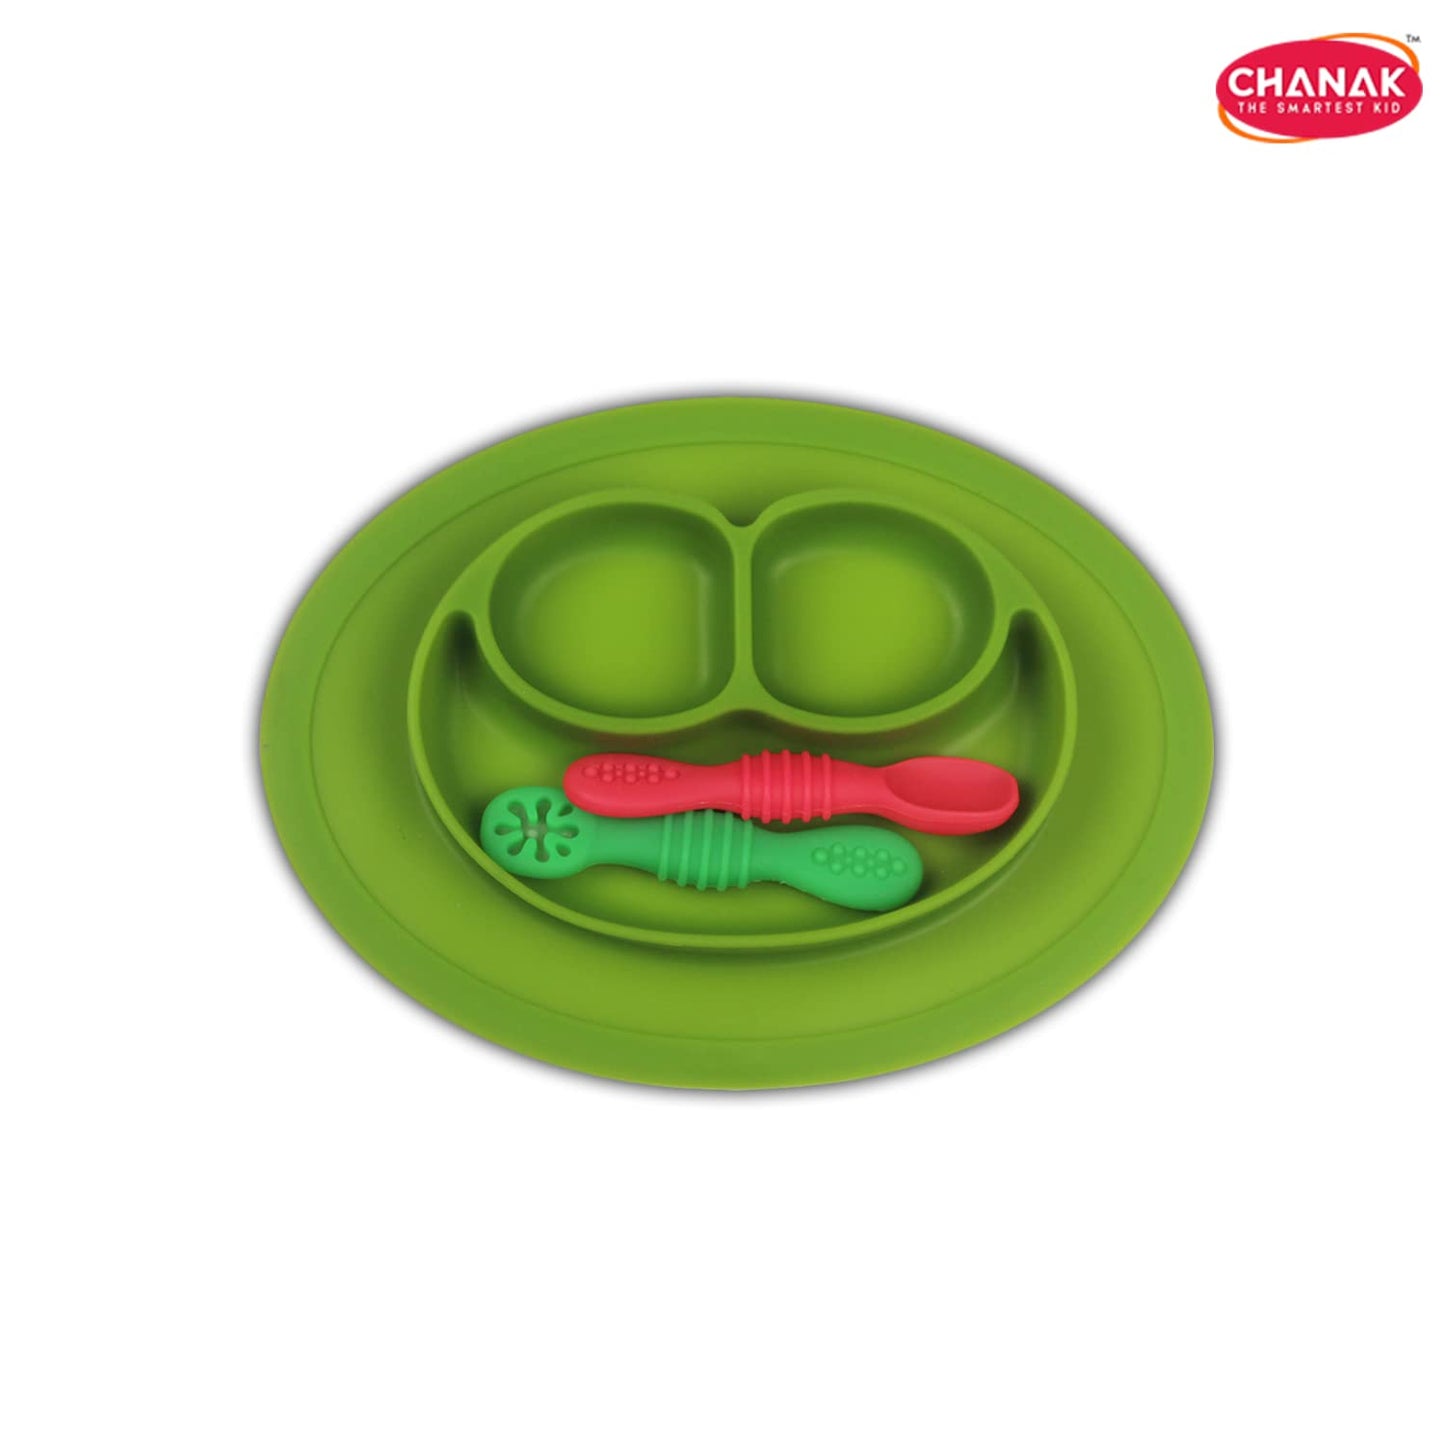 Chanak Baby Food Oval Tray - Silicon Plate with Multiple Compartments & Two Spoons (Dark Green) - chanak